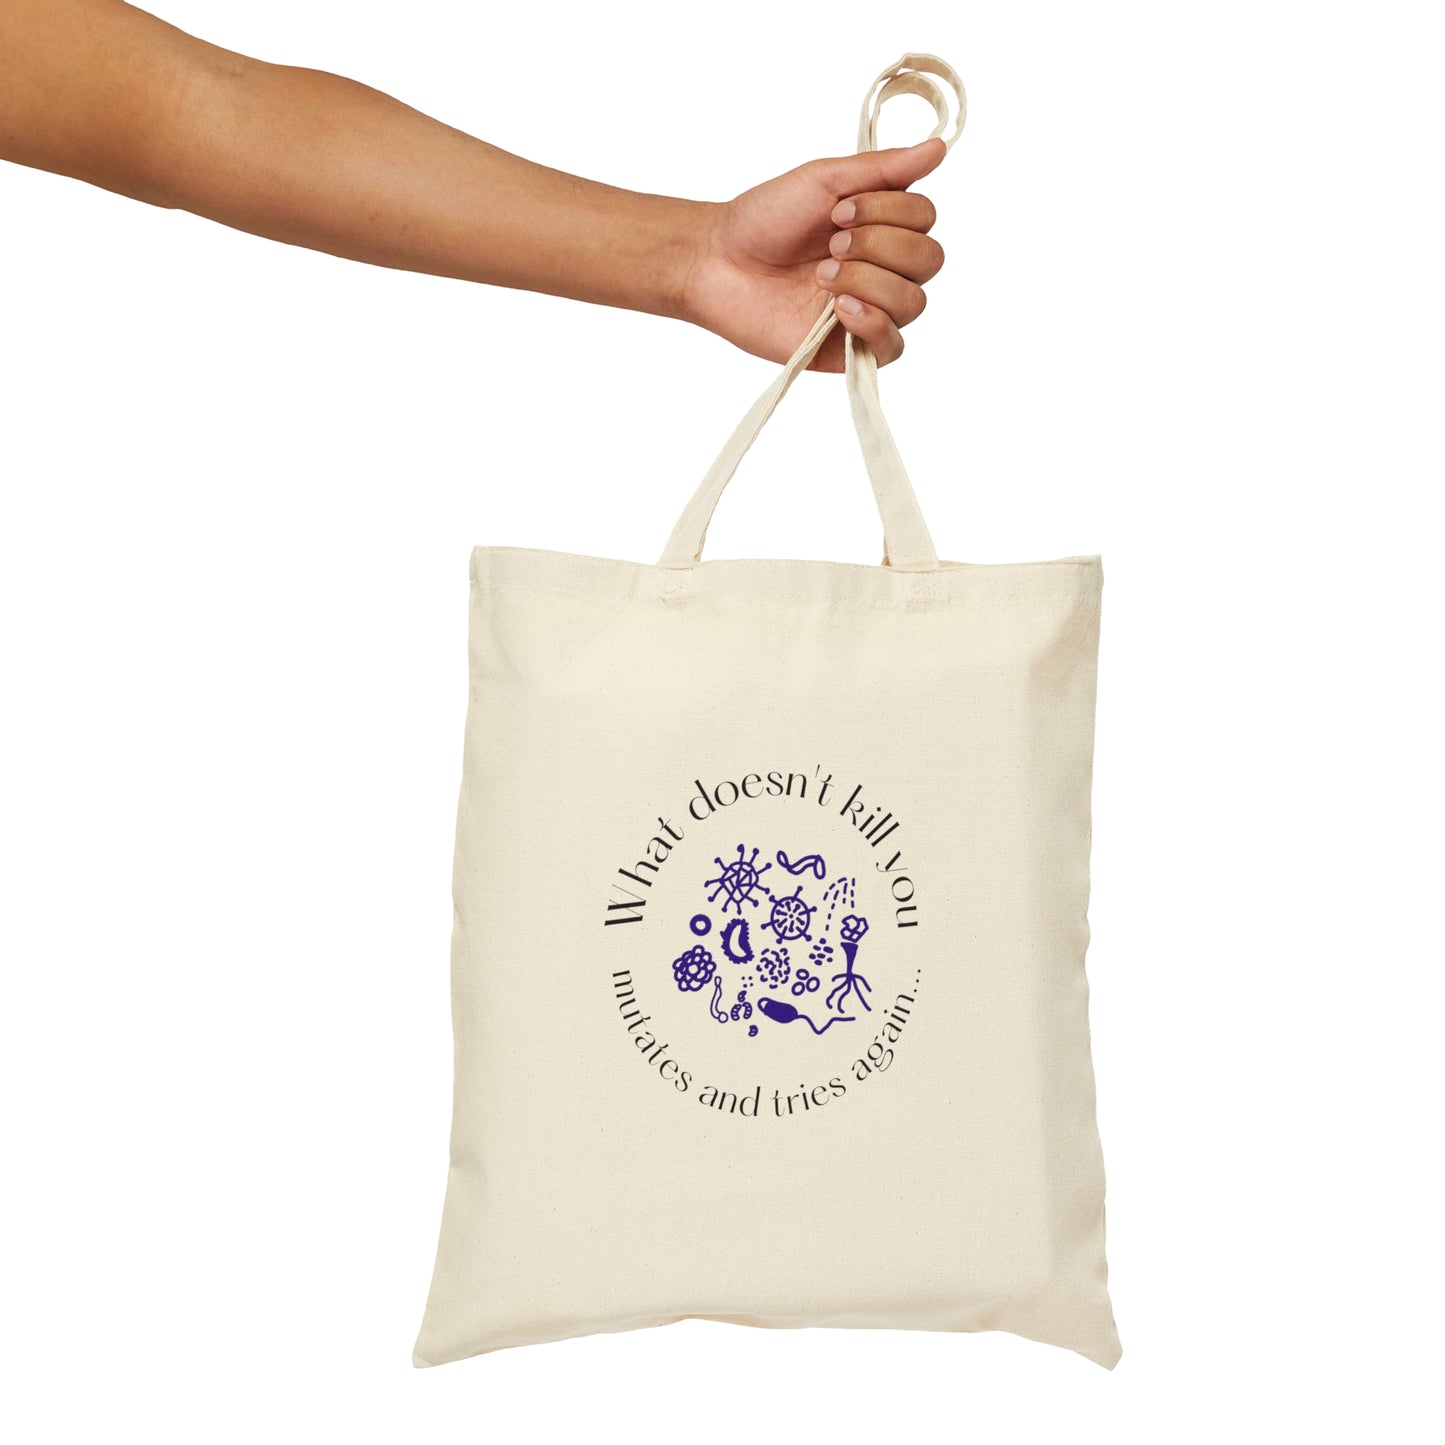 Infectious Diseases Cotton Canvas Tote Bag